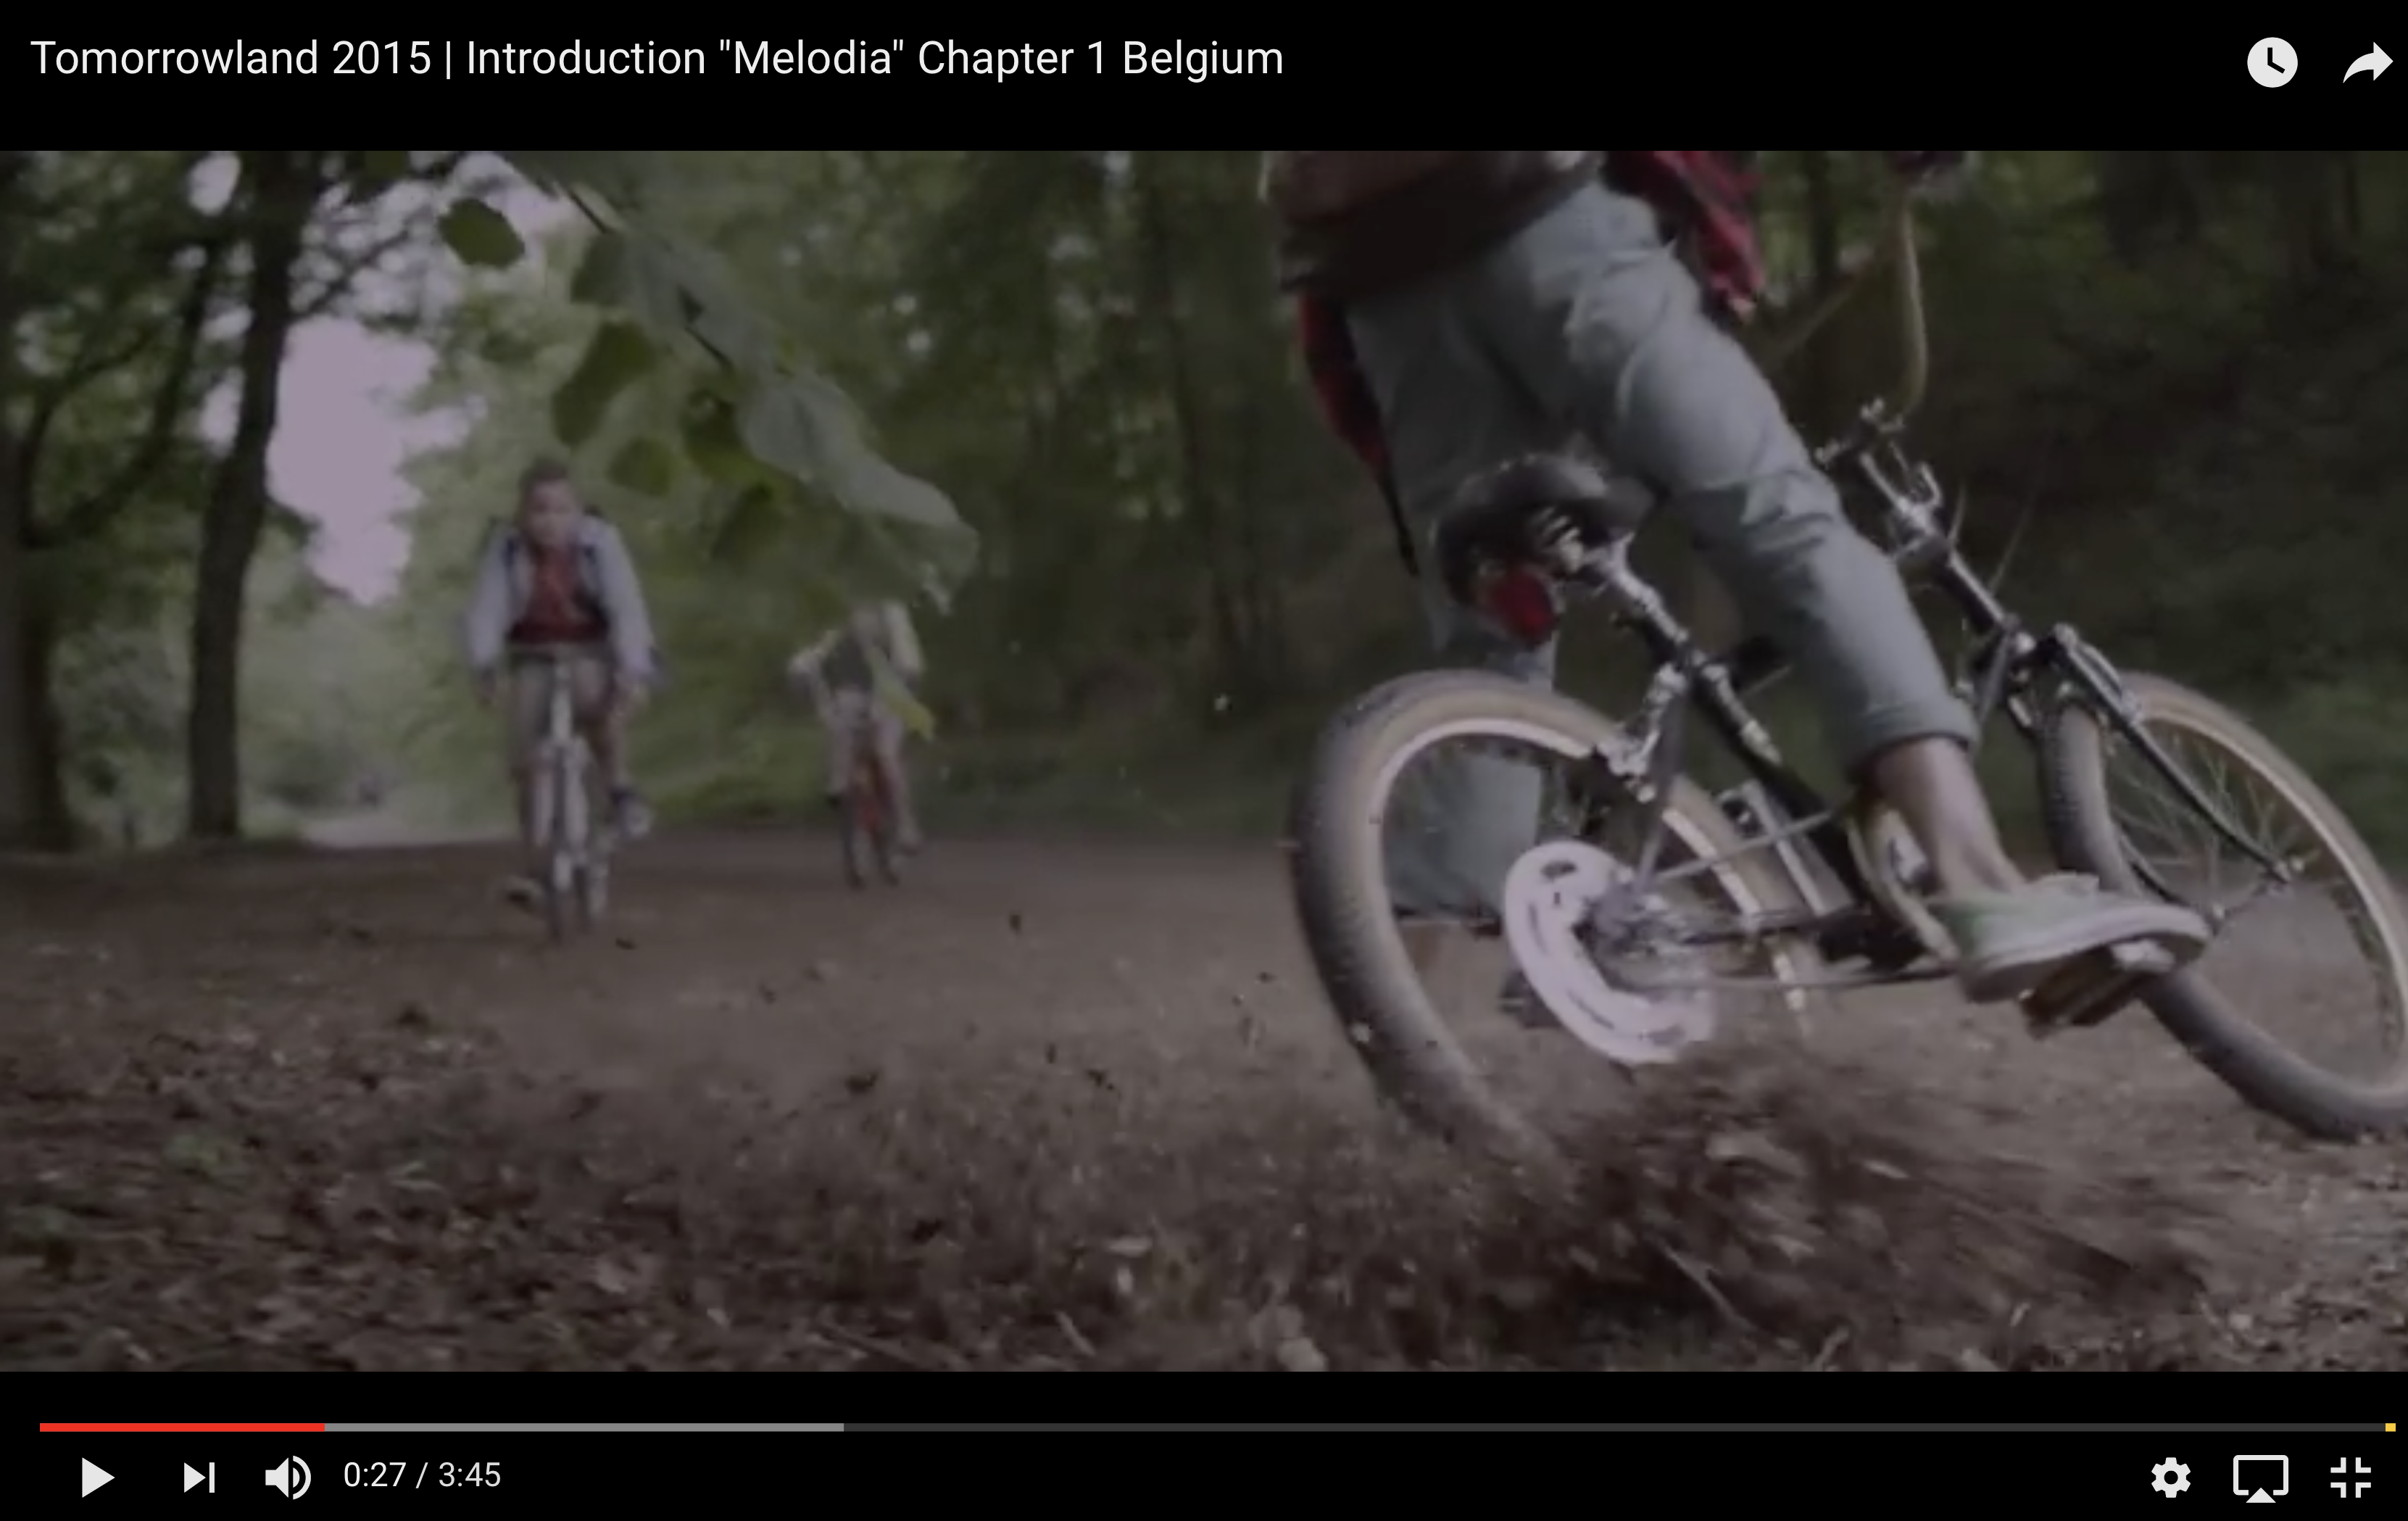 Tomorrowland 2015 | Introduction "Melodia" Chapter 1 Belgium, tumbleweed cycles